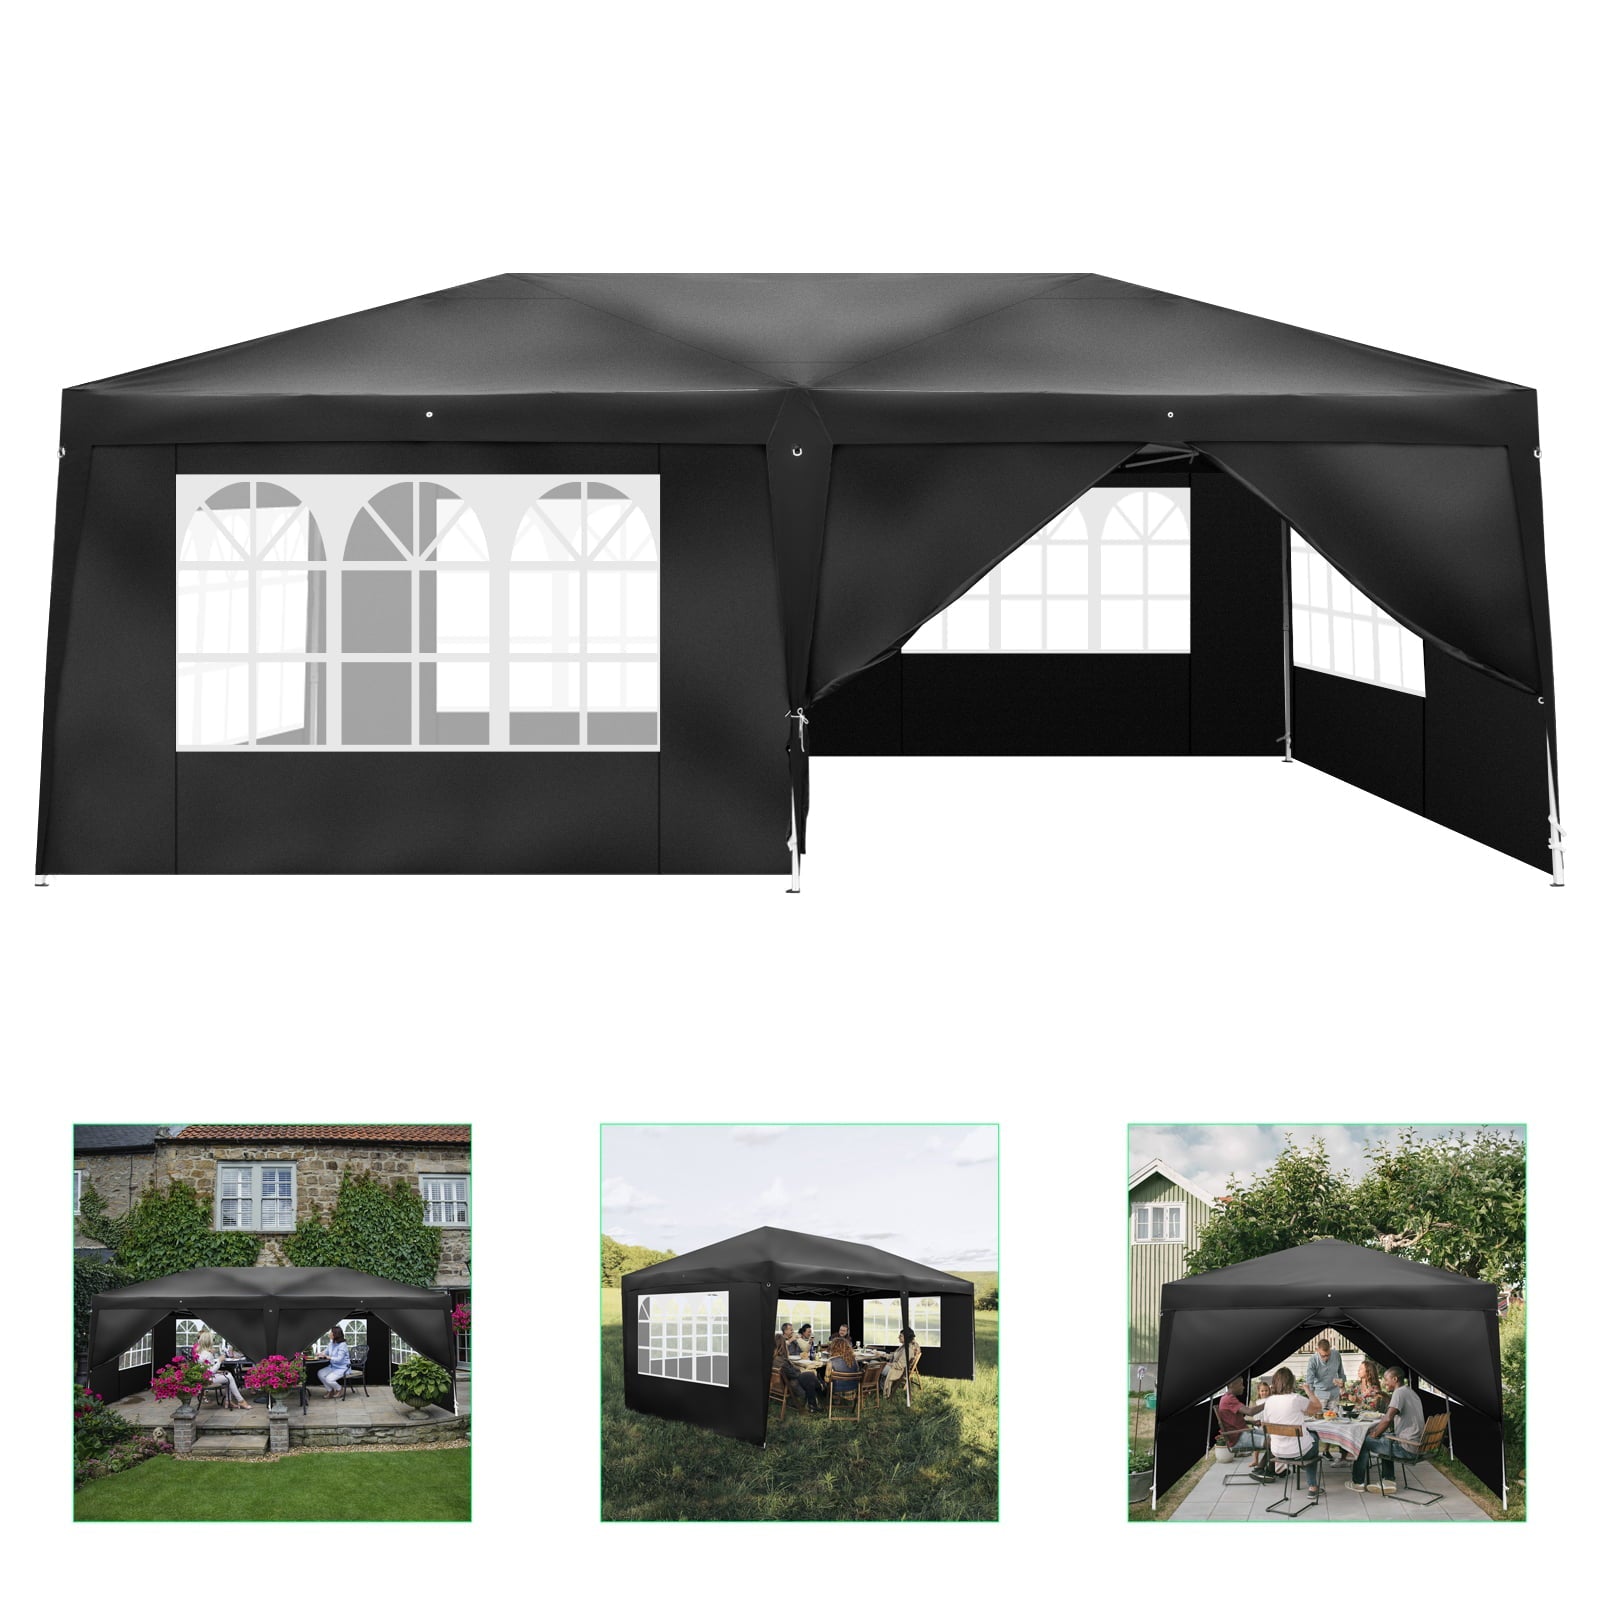 Zimtown Easy Pop up Tent Party Canopy with 6 Walls 10' x 20' Outdoor Black